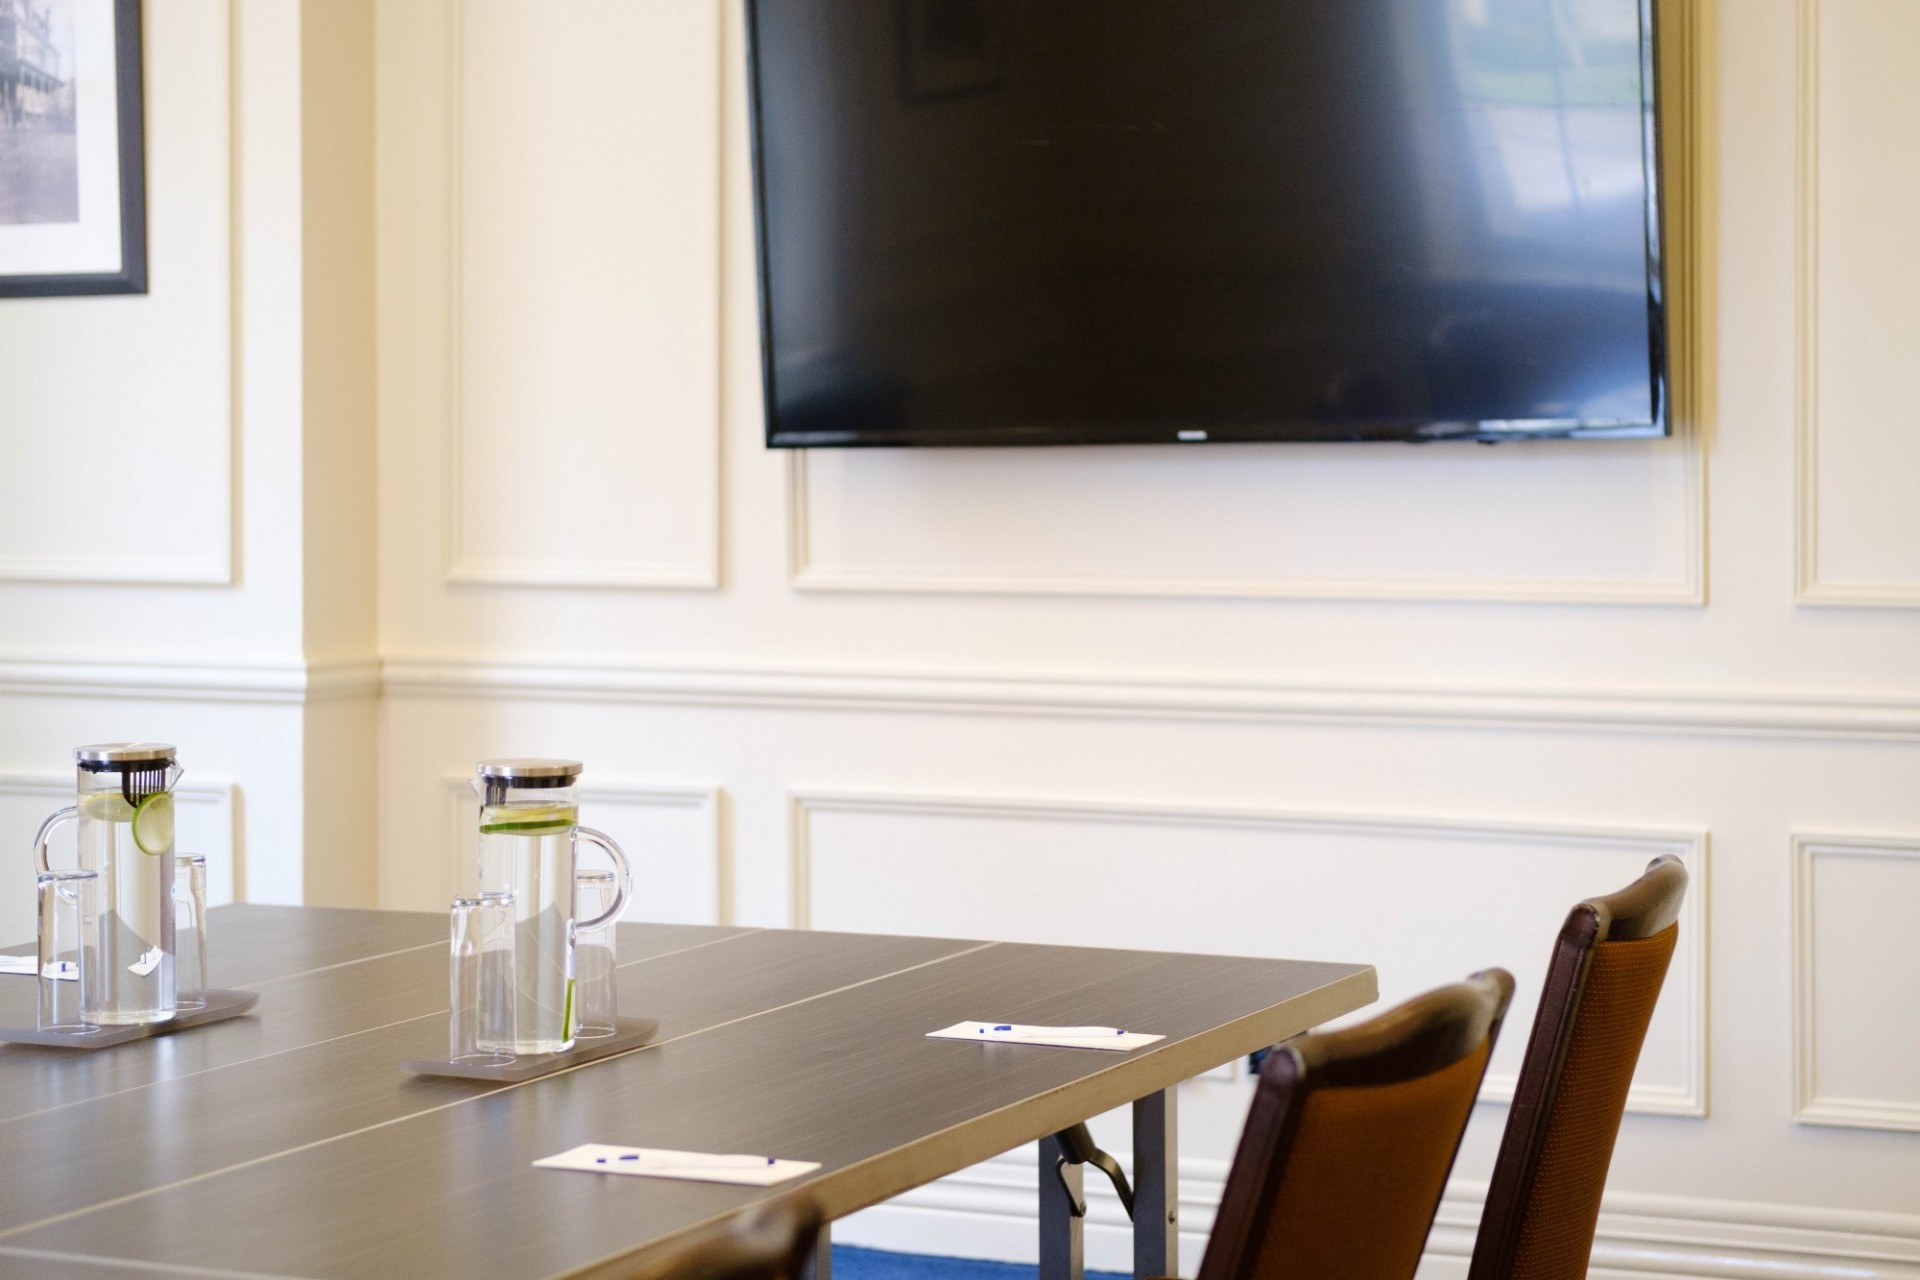 A flatscreen TV is mounted in the 1754 Boardroom